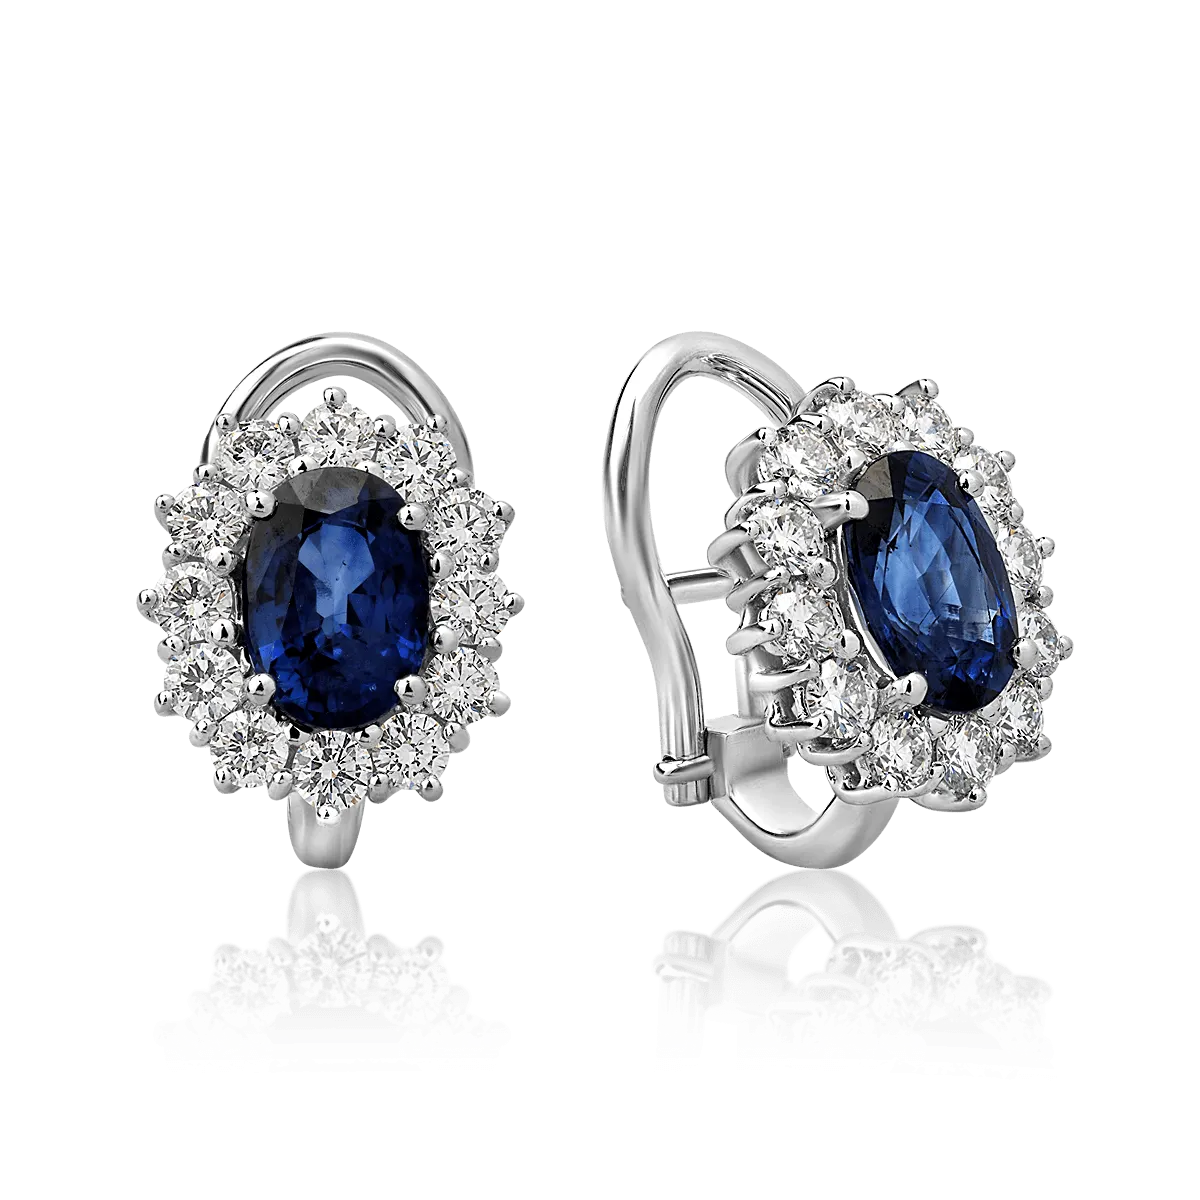 18K white gold earrings with 2.43ct sapphires and 0.92ct diamonds